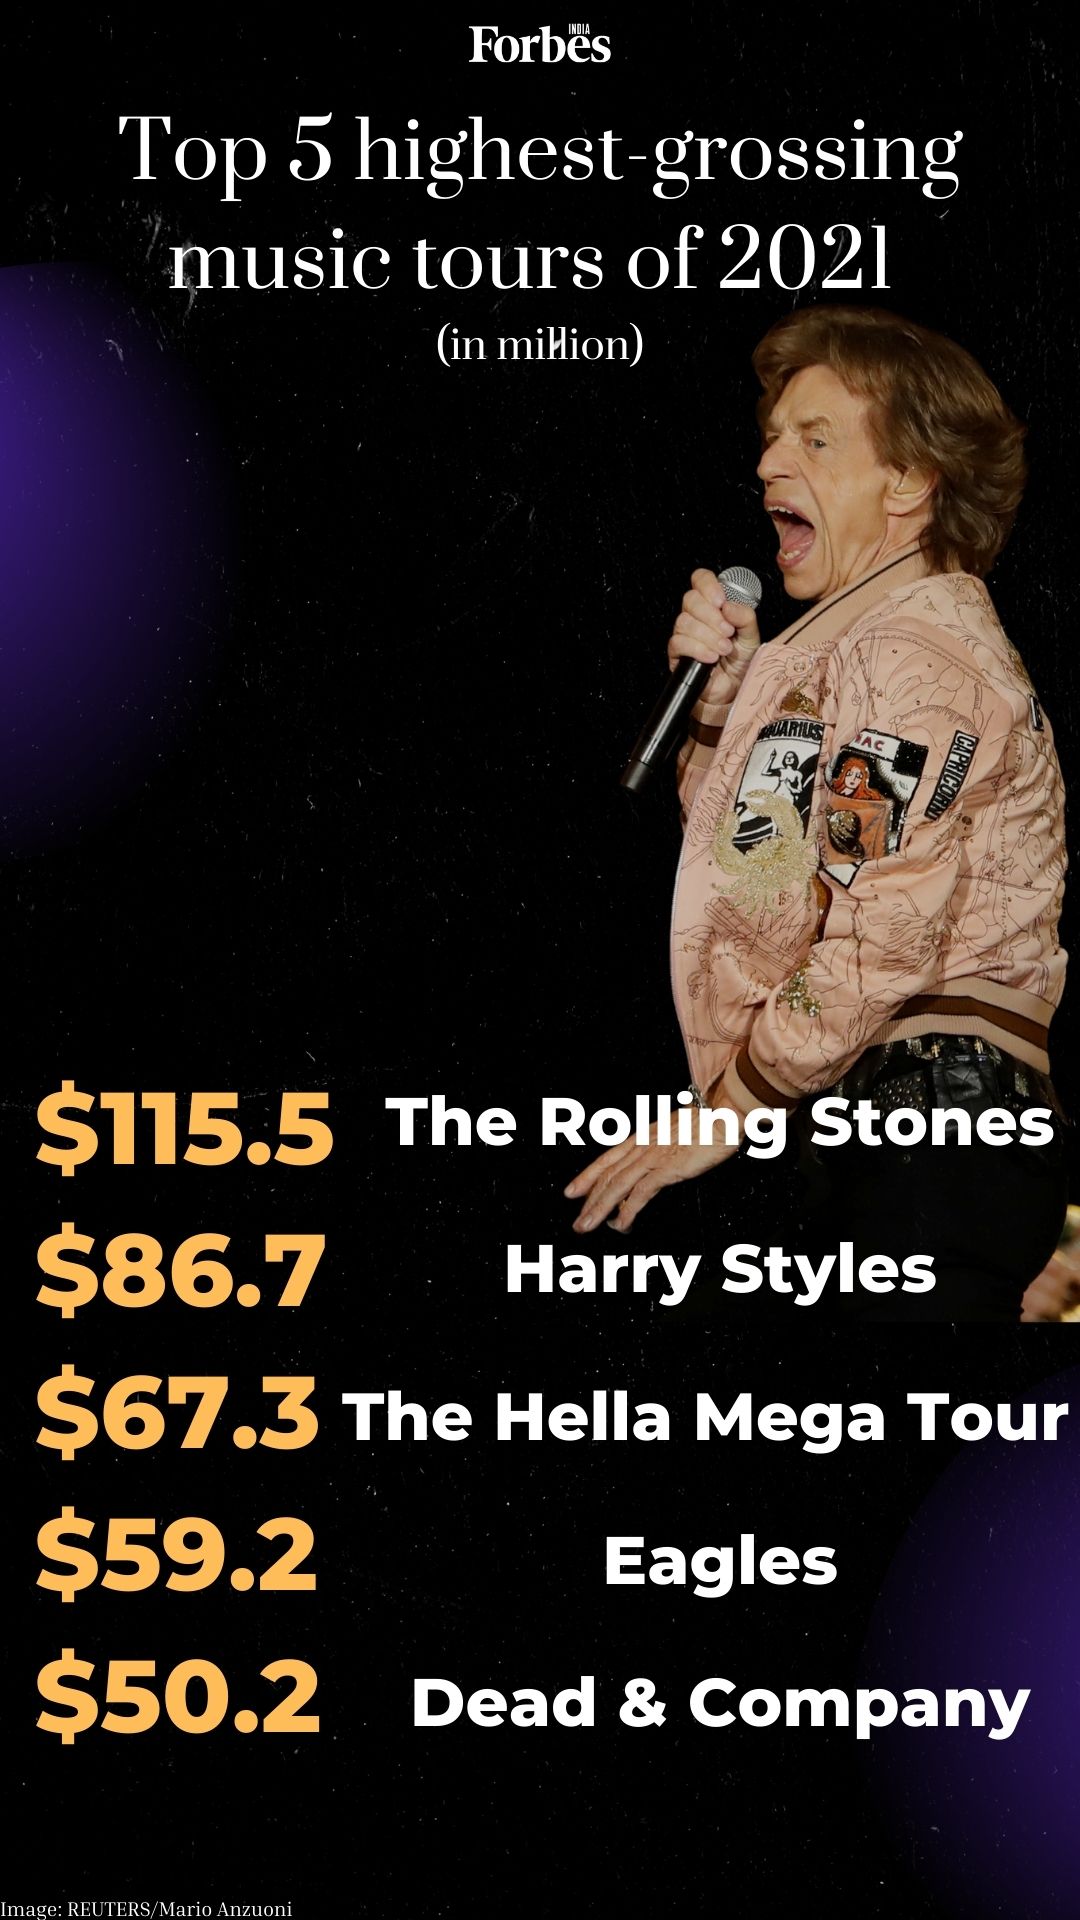 At $115.5 million, The Rolling Stones rule the return of music tours in 2021